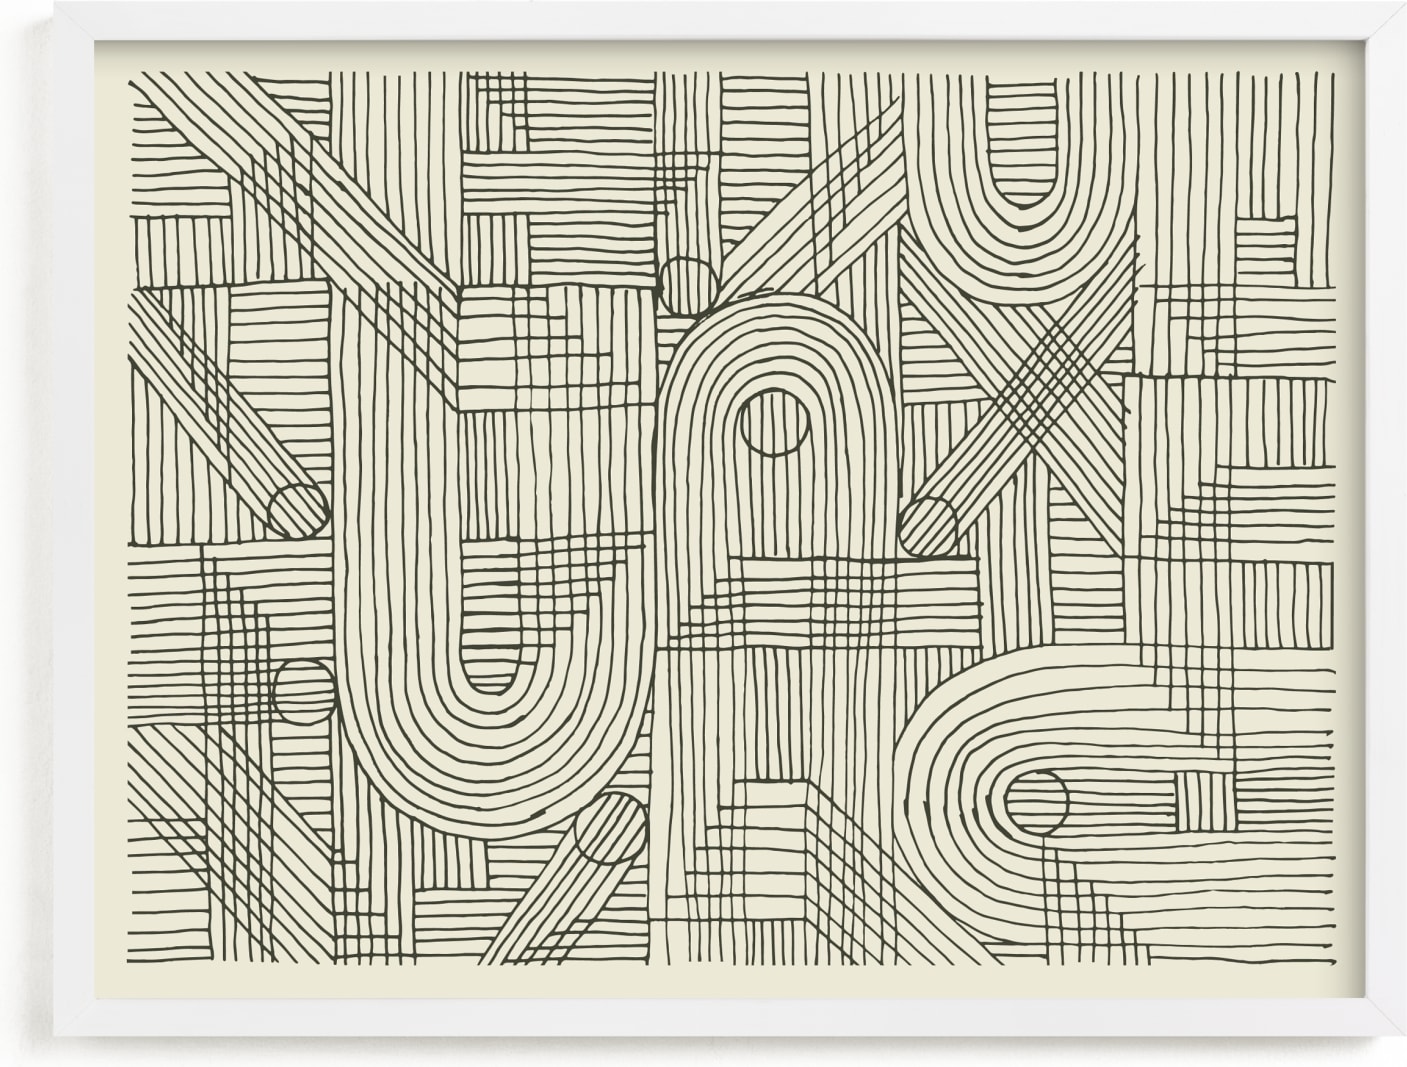 This is a black and white, beige art by Katie Zimpel called Sketchy Pattern.